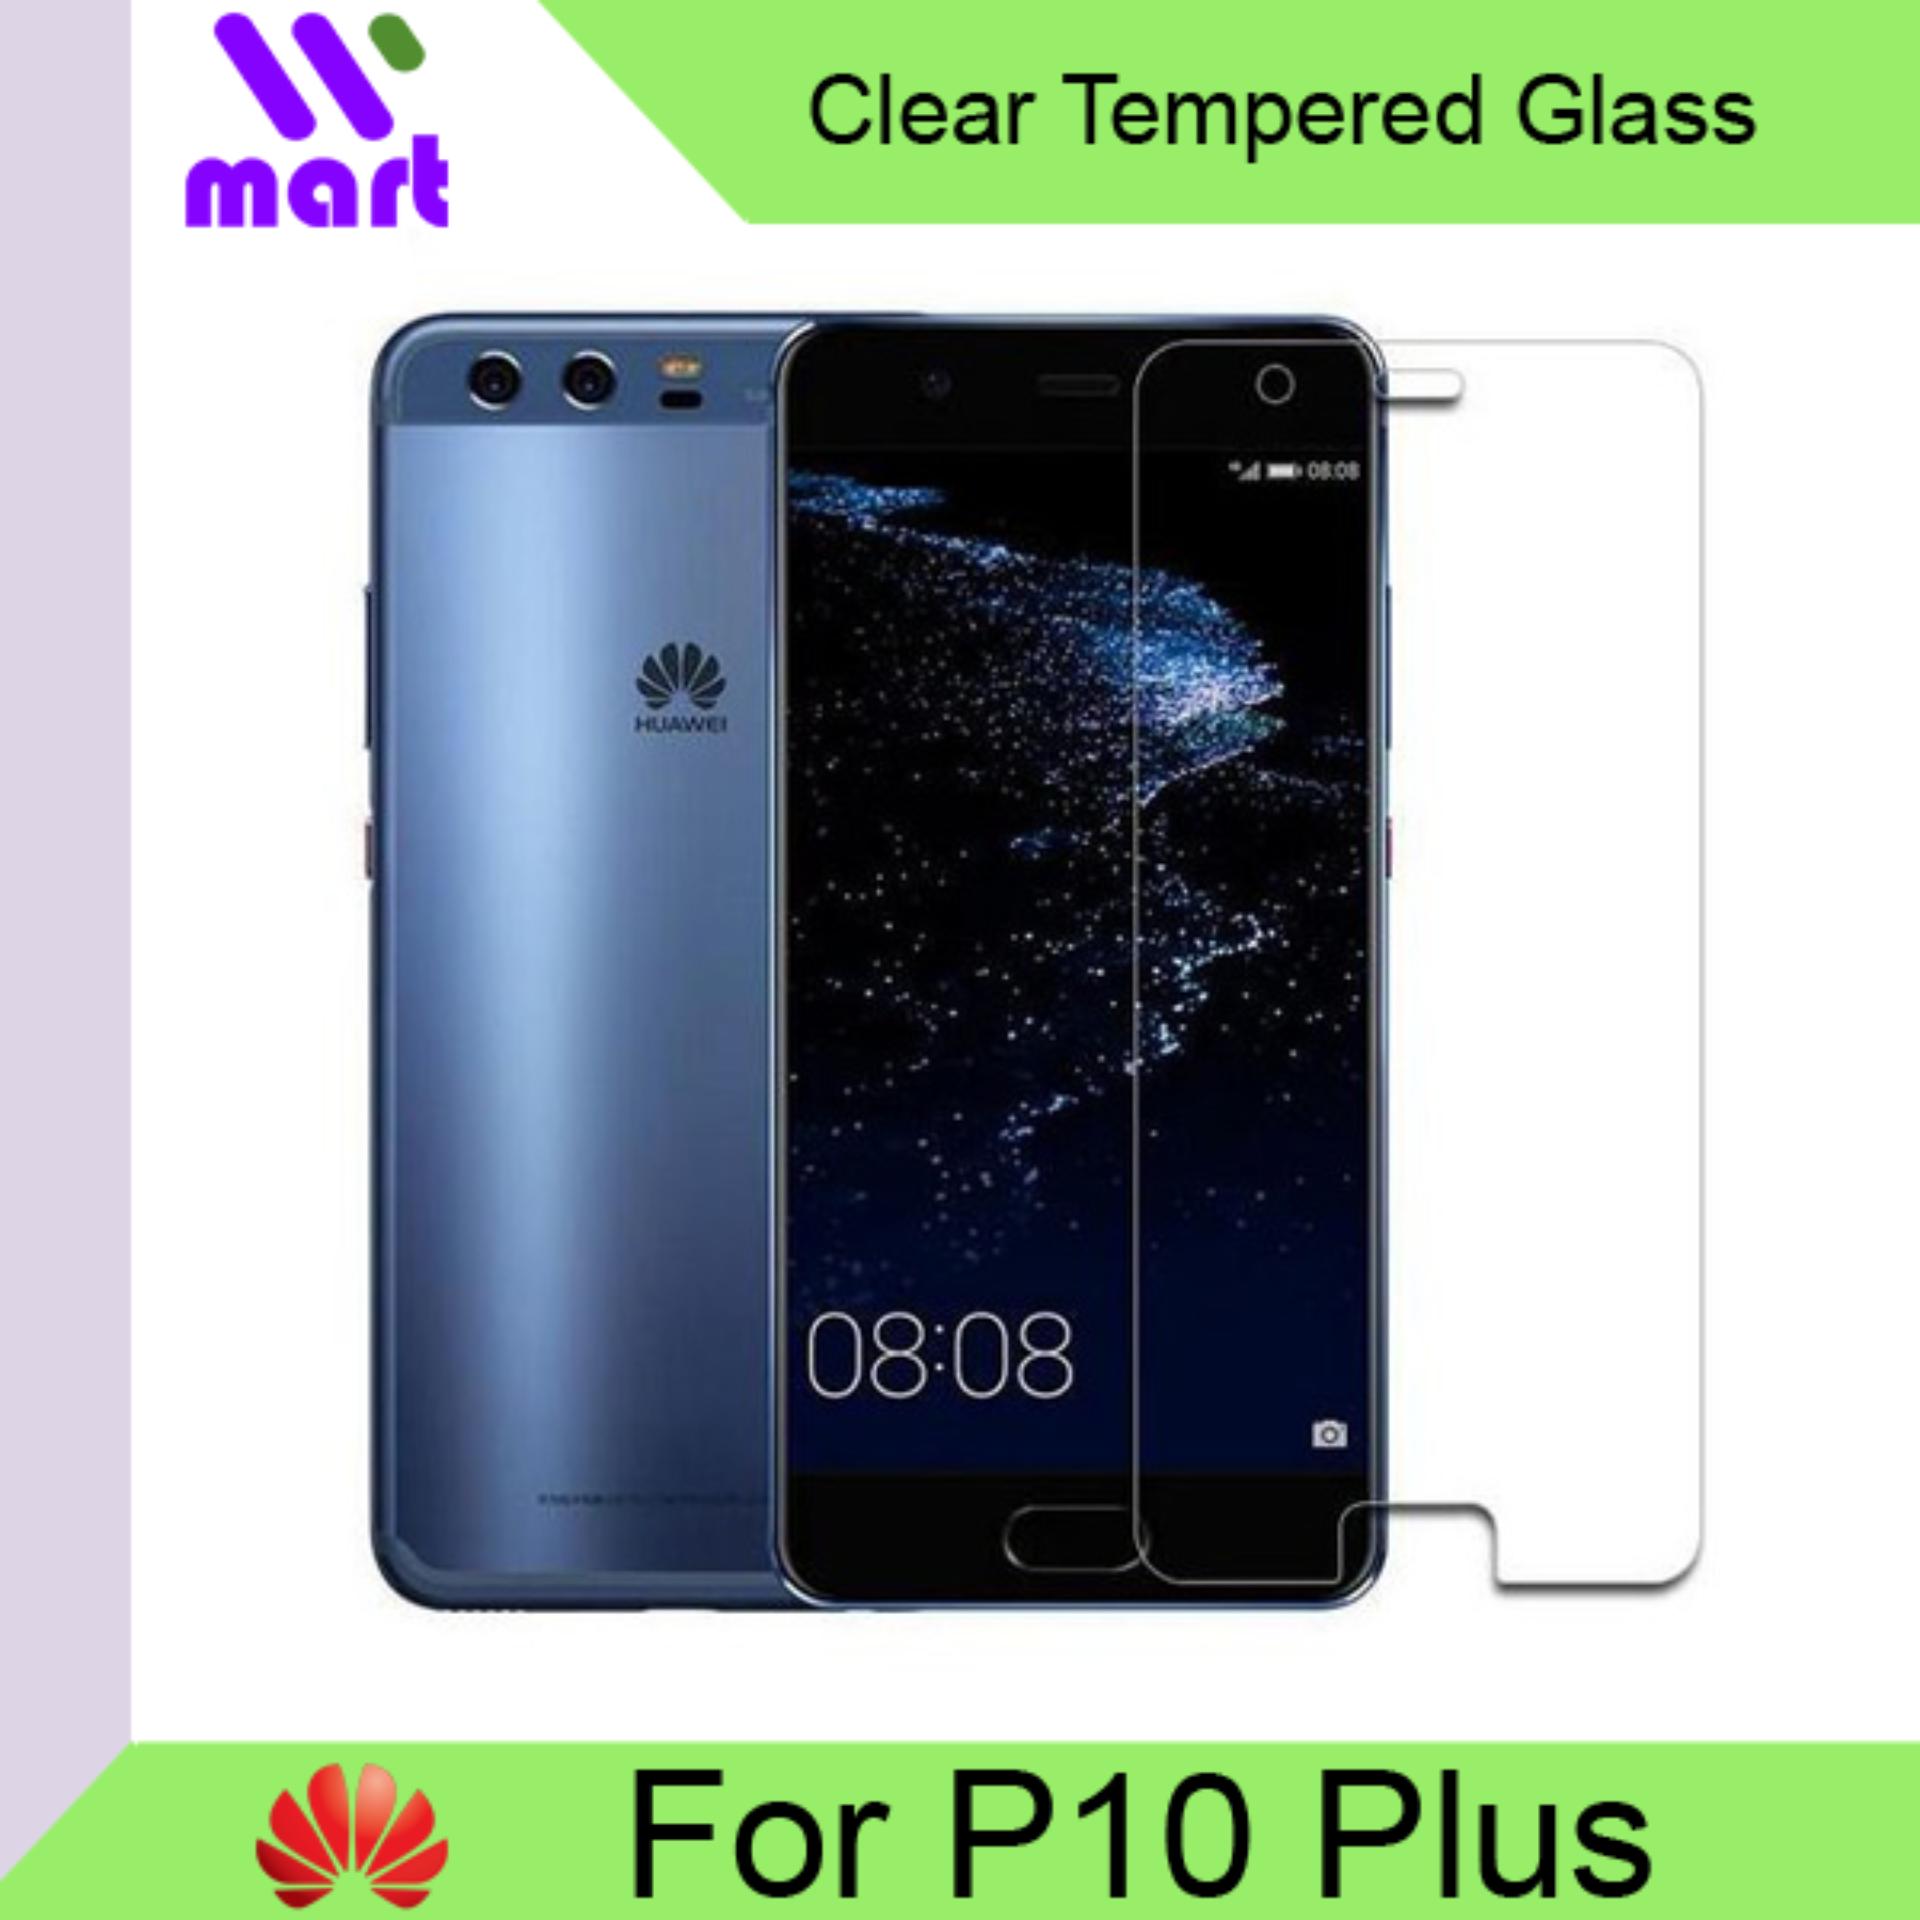 Tempered Glass Screen Protector (Clear) For Huawei P10 Plus